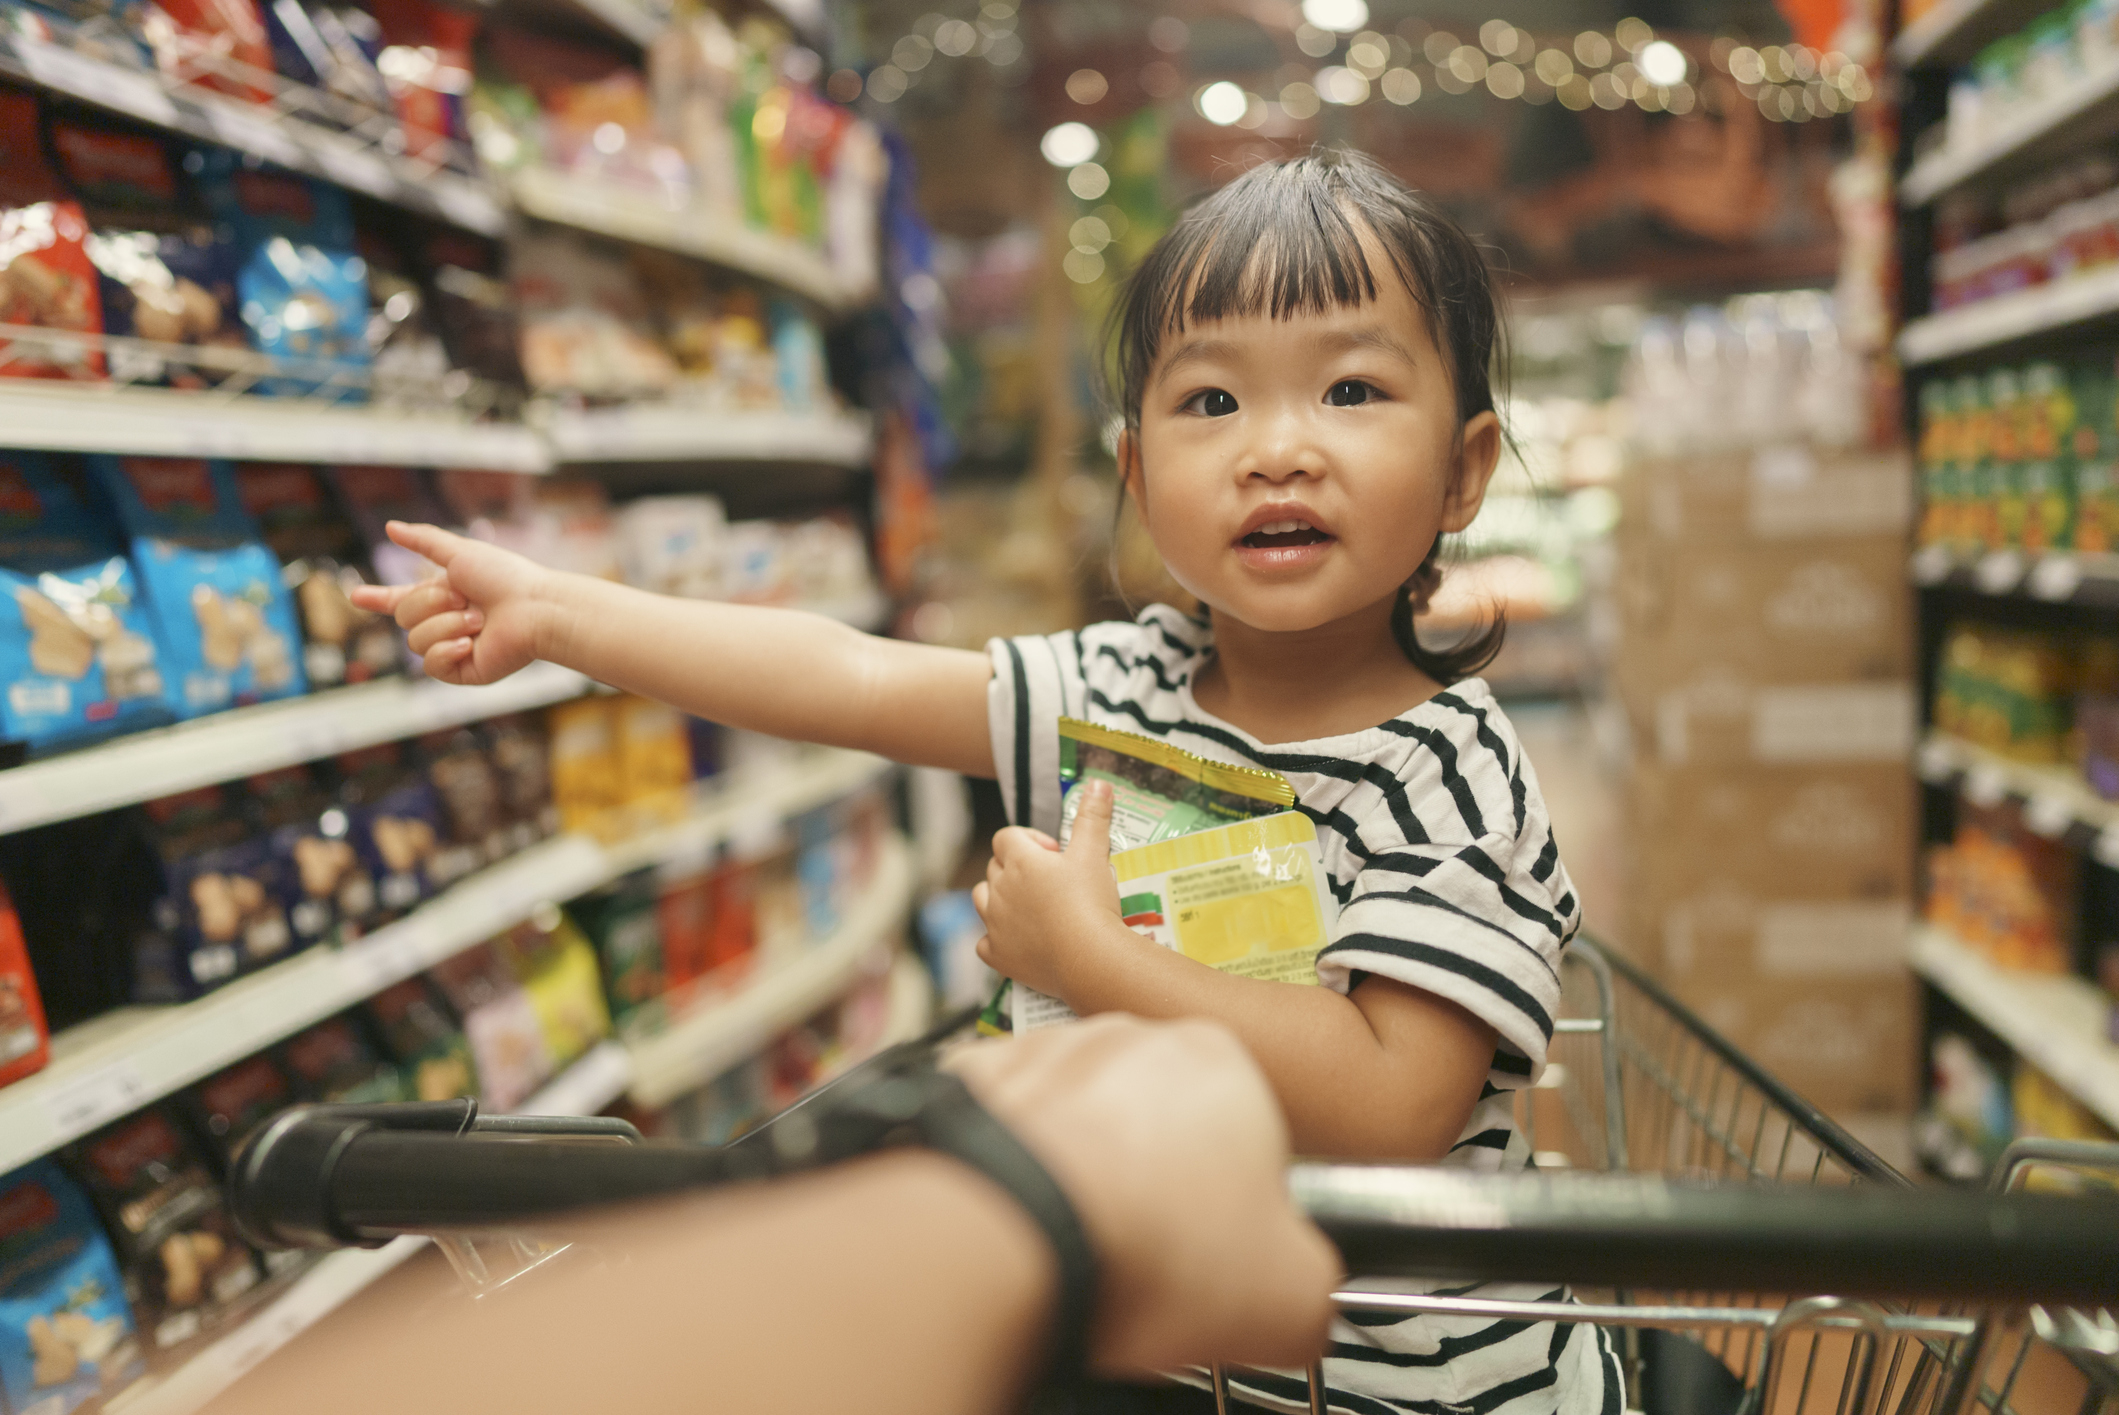 Toddler in a shopping cart pointing at grocery store shelves, appearing curious